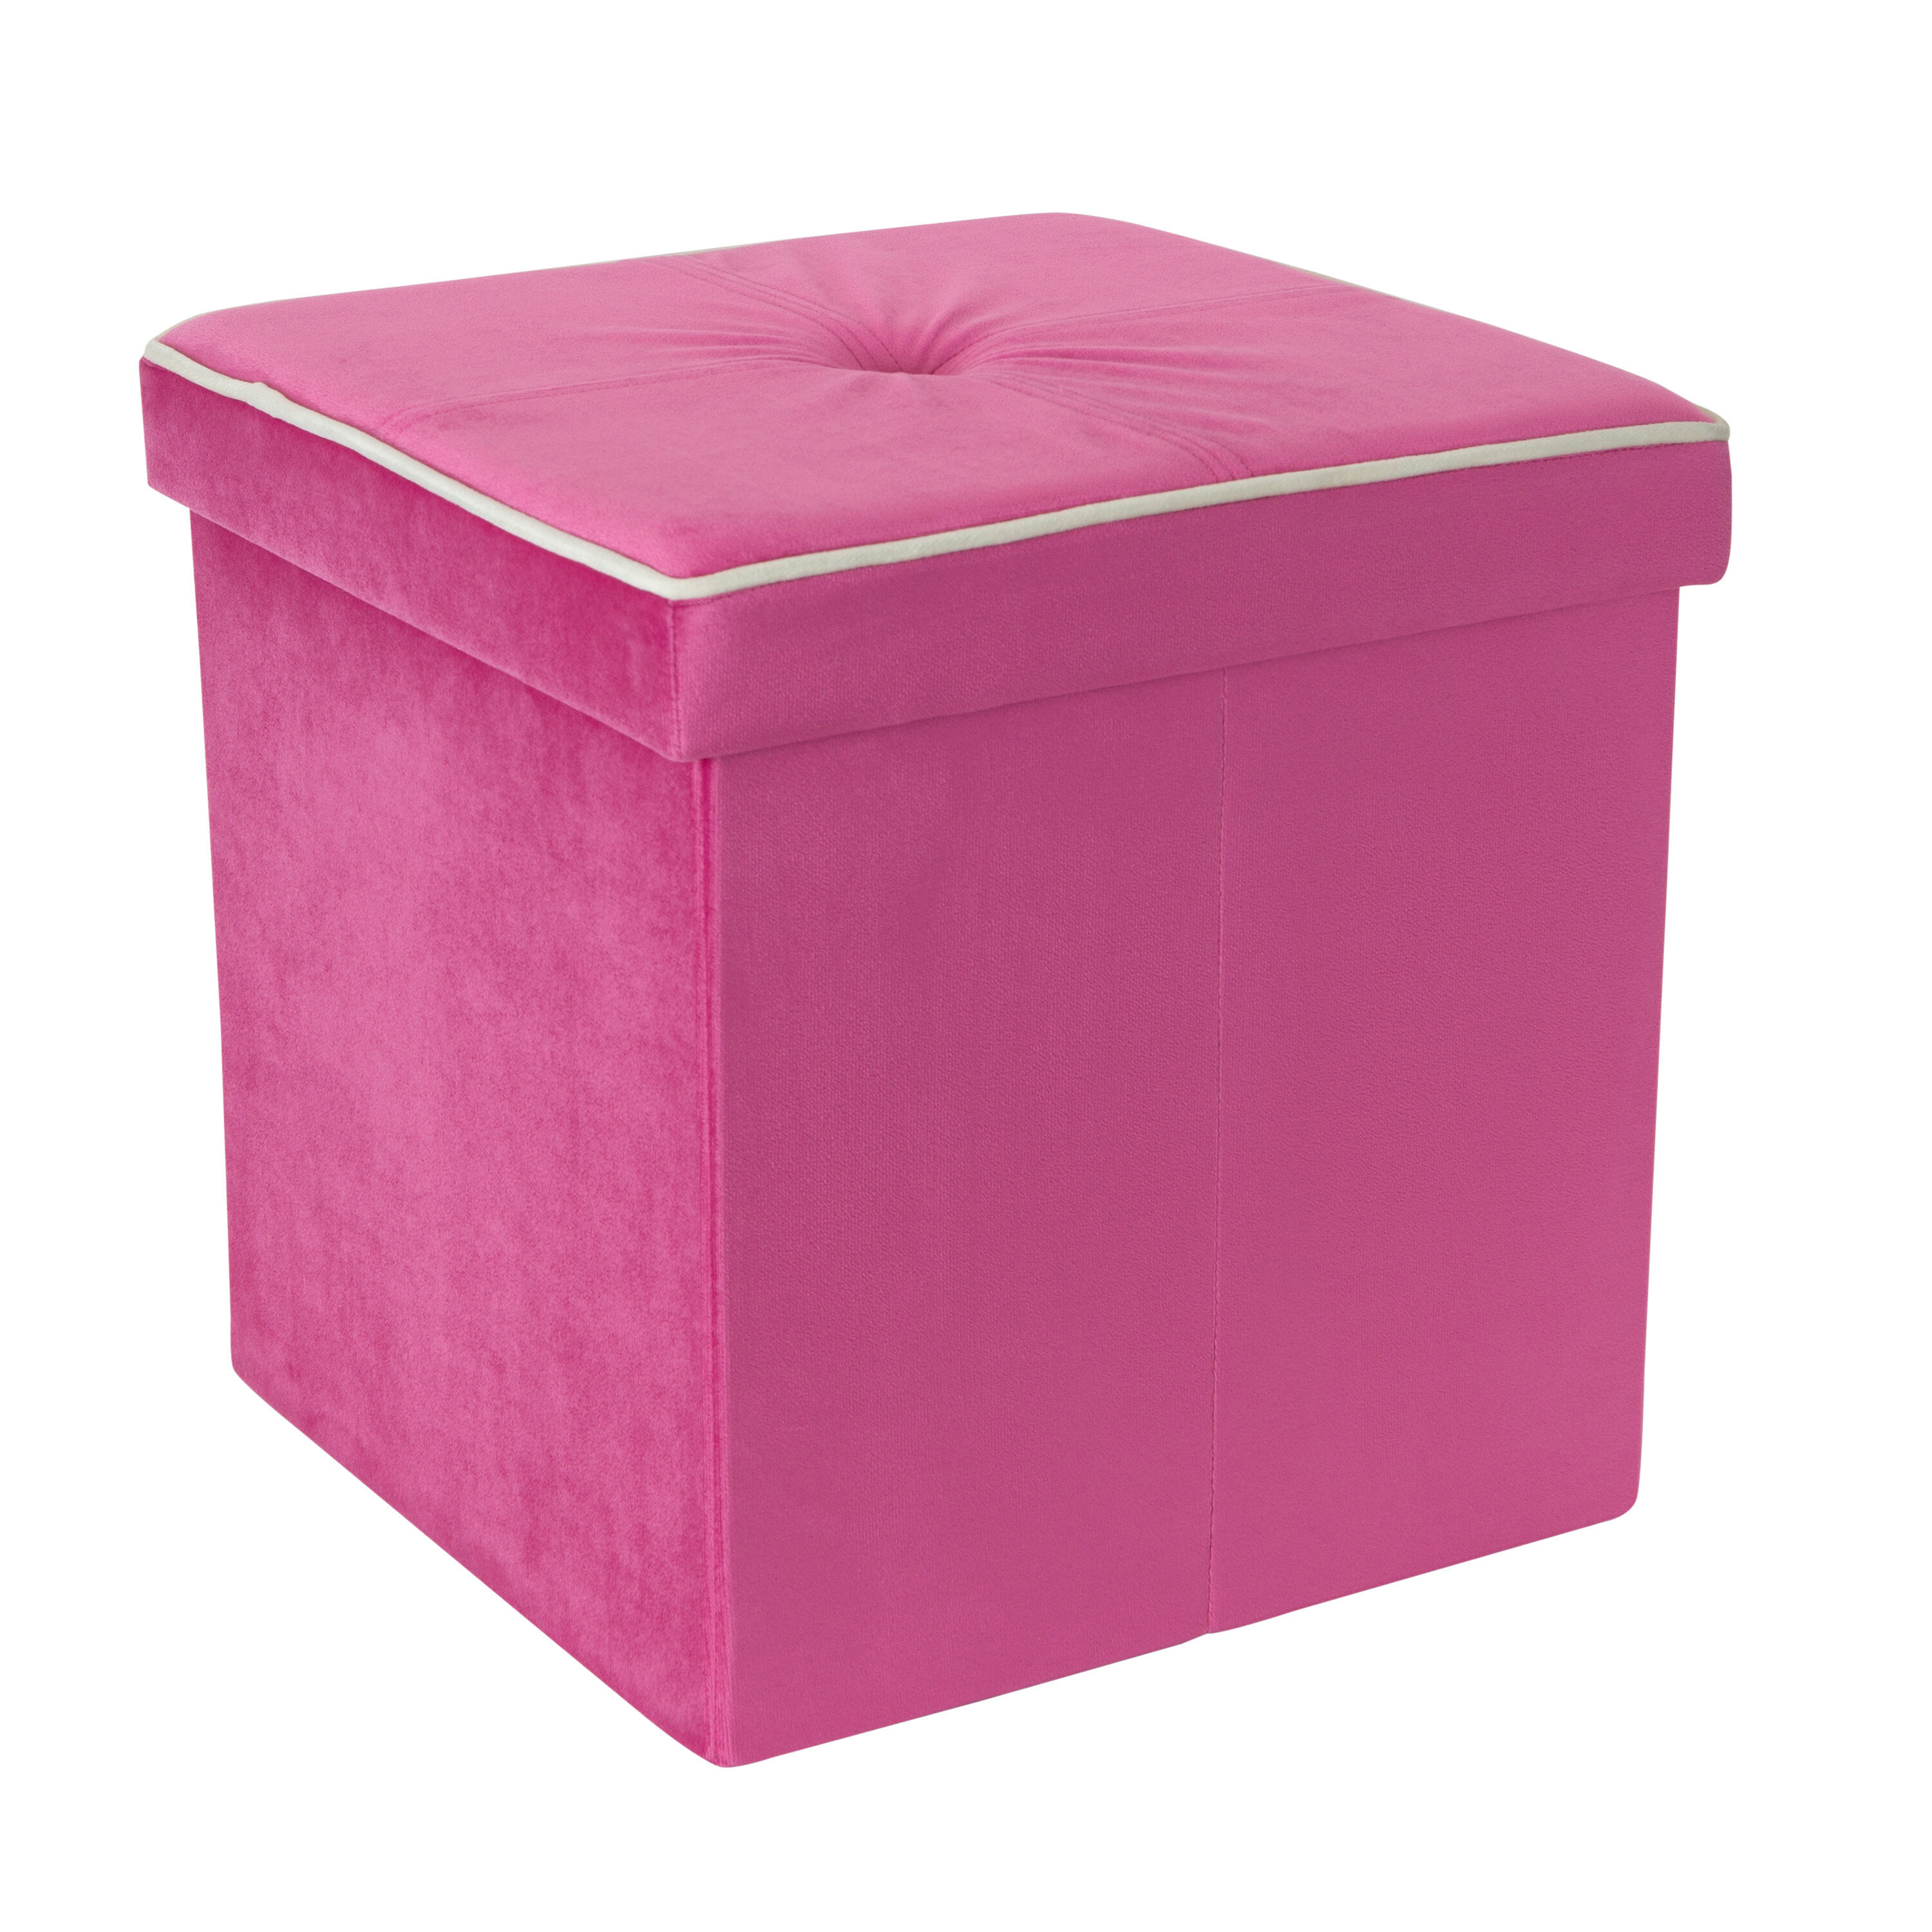 Cherry Blossom Pink Storage Baskets for Shelves Foldable Collapsible  Storage Box Bins with Cubes Toys Closet Organizers for Pantry Bathroom Baby  Cloth